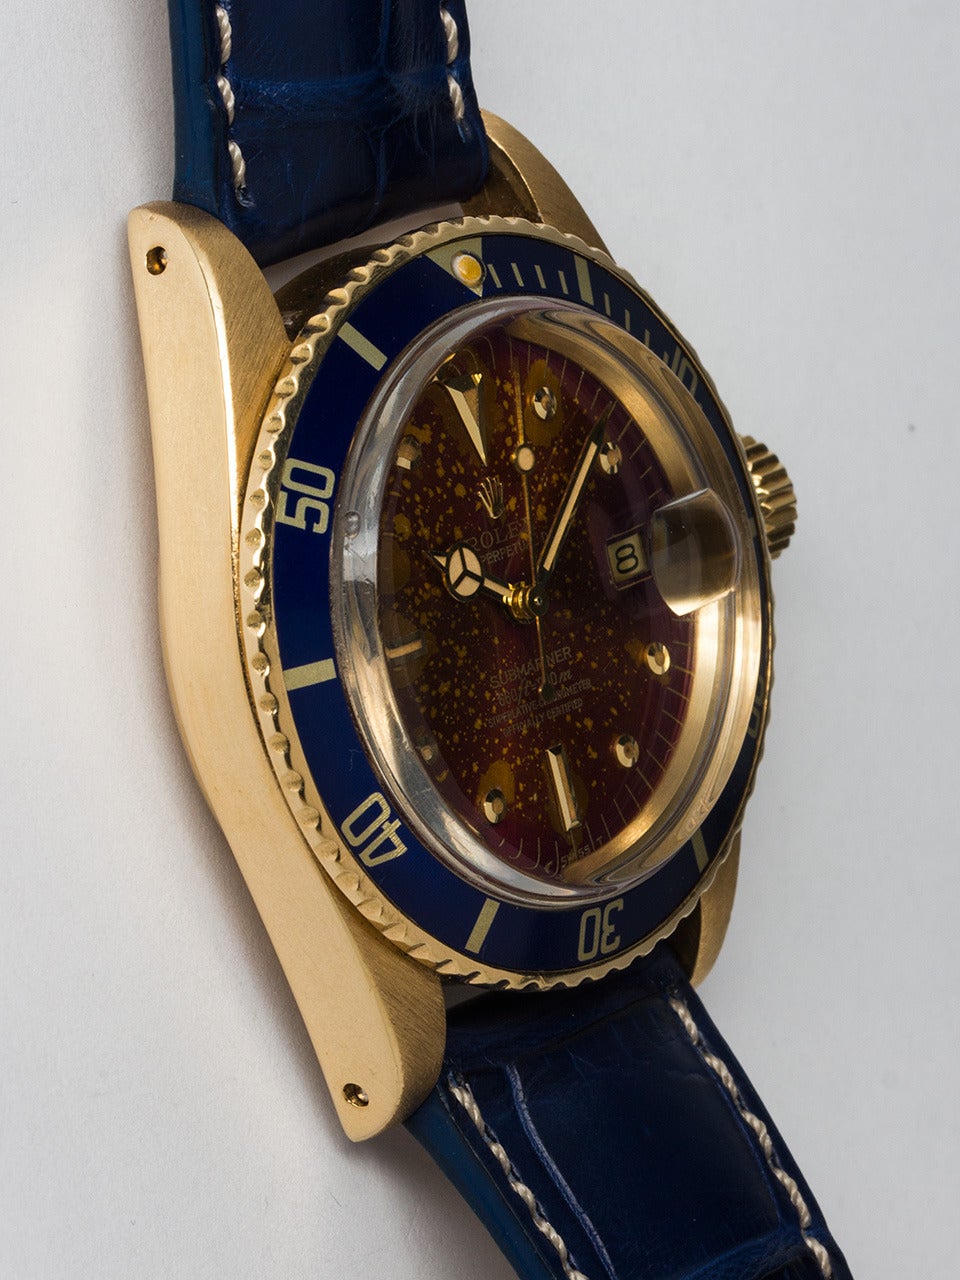 Rolex 18K Yellow Gold Submariner Wristwatch ref 1680 serial #5.8 million circa 1978. 40 mm diameter case with bi-directional elapsed time bezel with original blue insert with antique color pearl and acrylic crystal. Gorgeous and distinctive natural